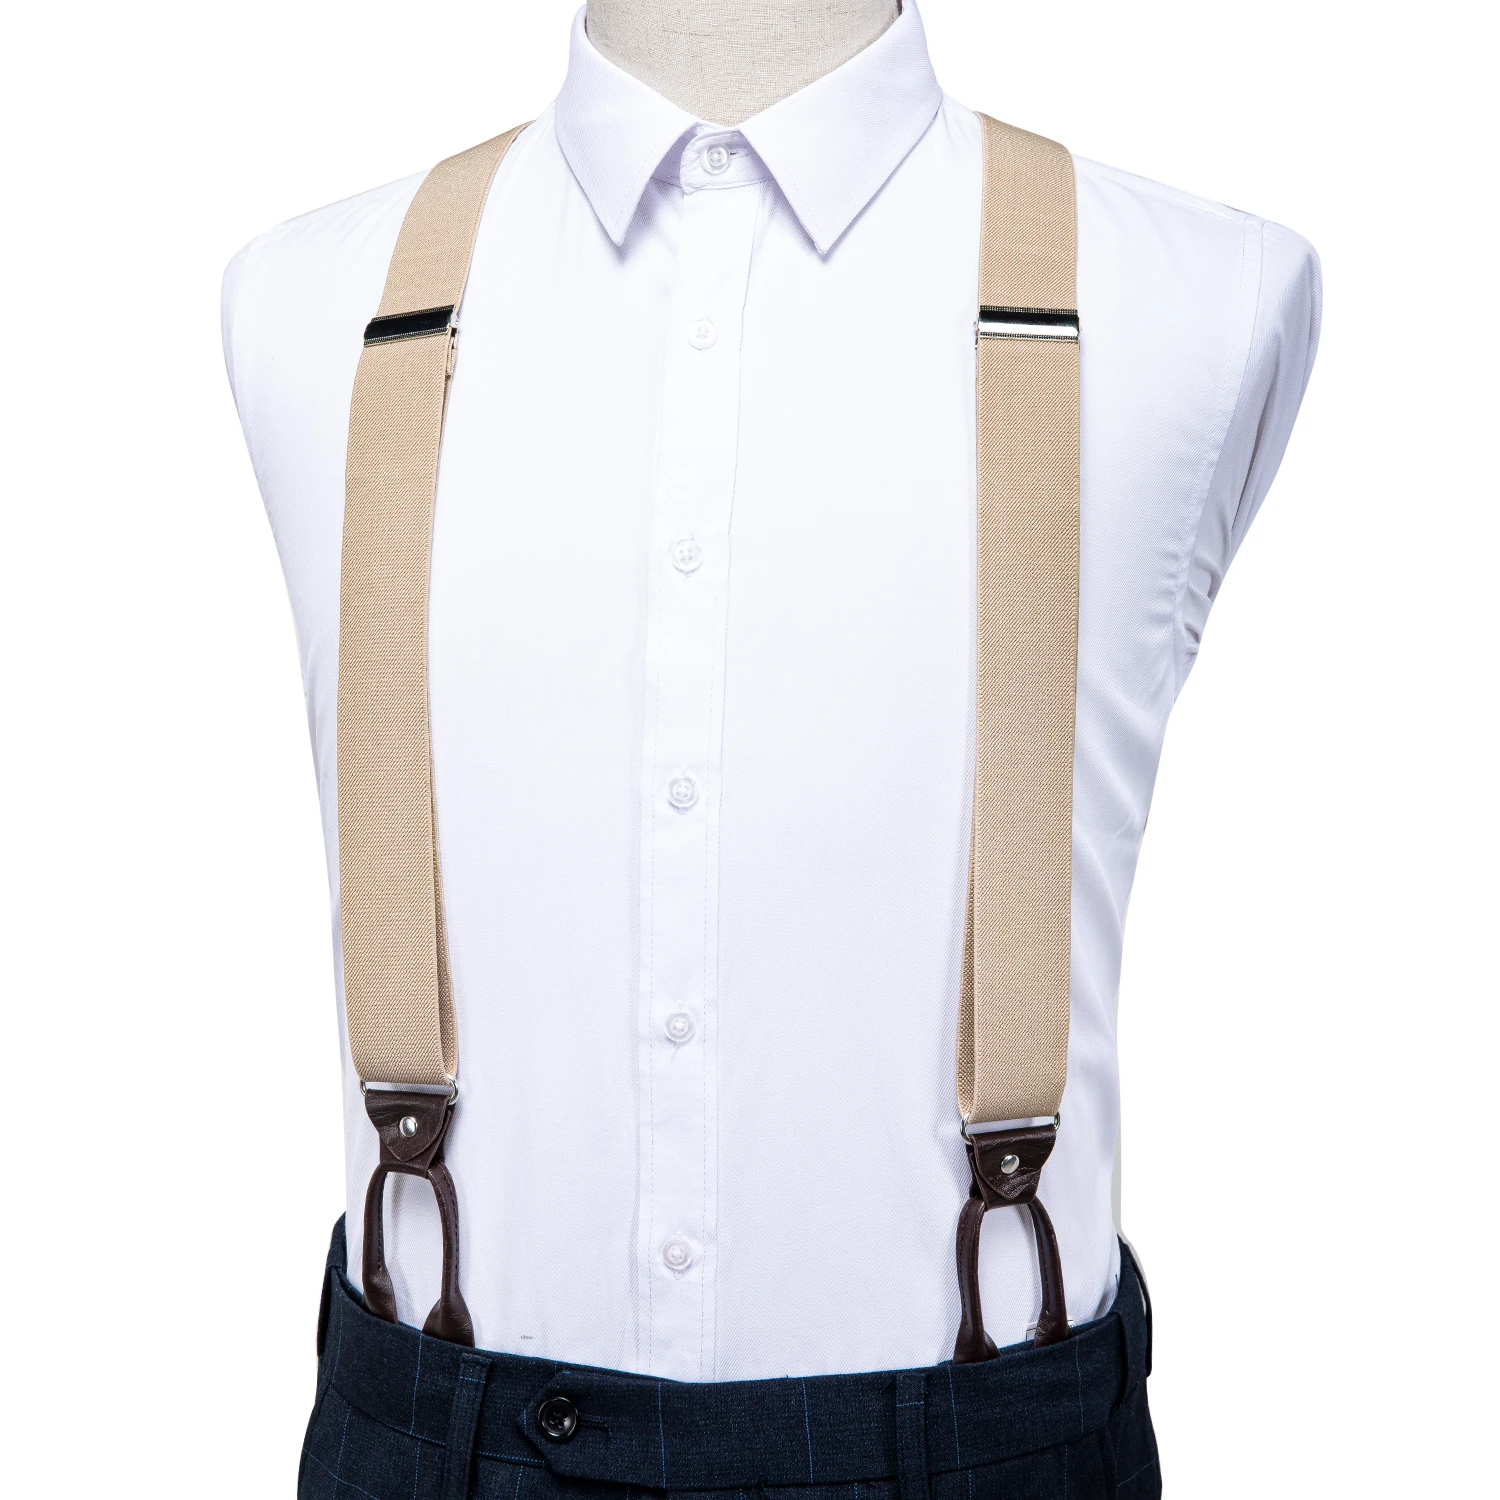 NEW Mens Black Button Suspenders Tuxedo Braces Y Back Real Leather Elastic USA 